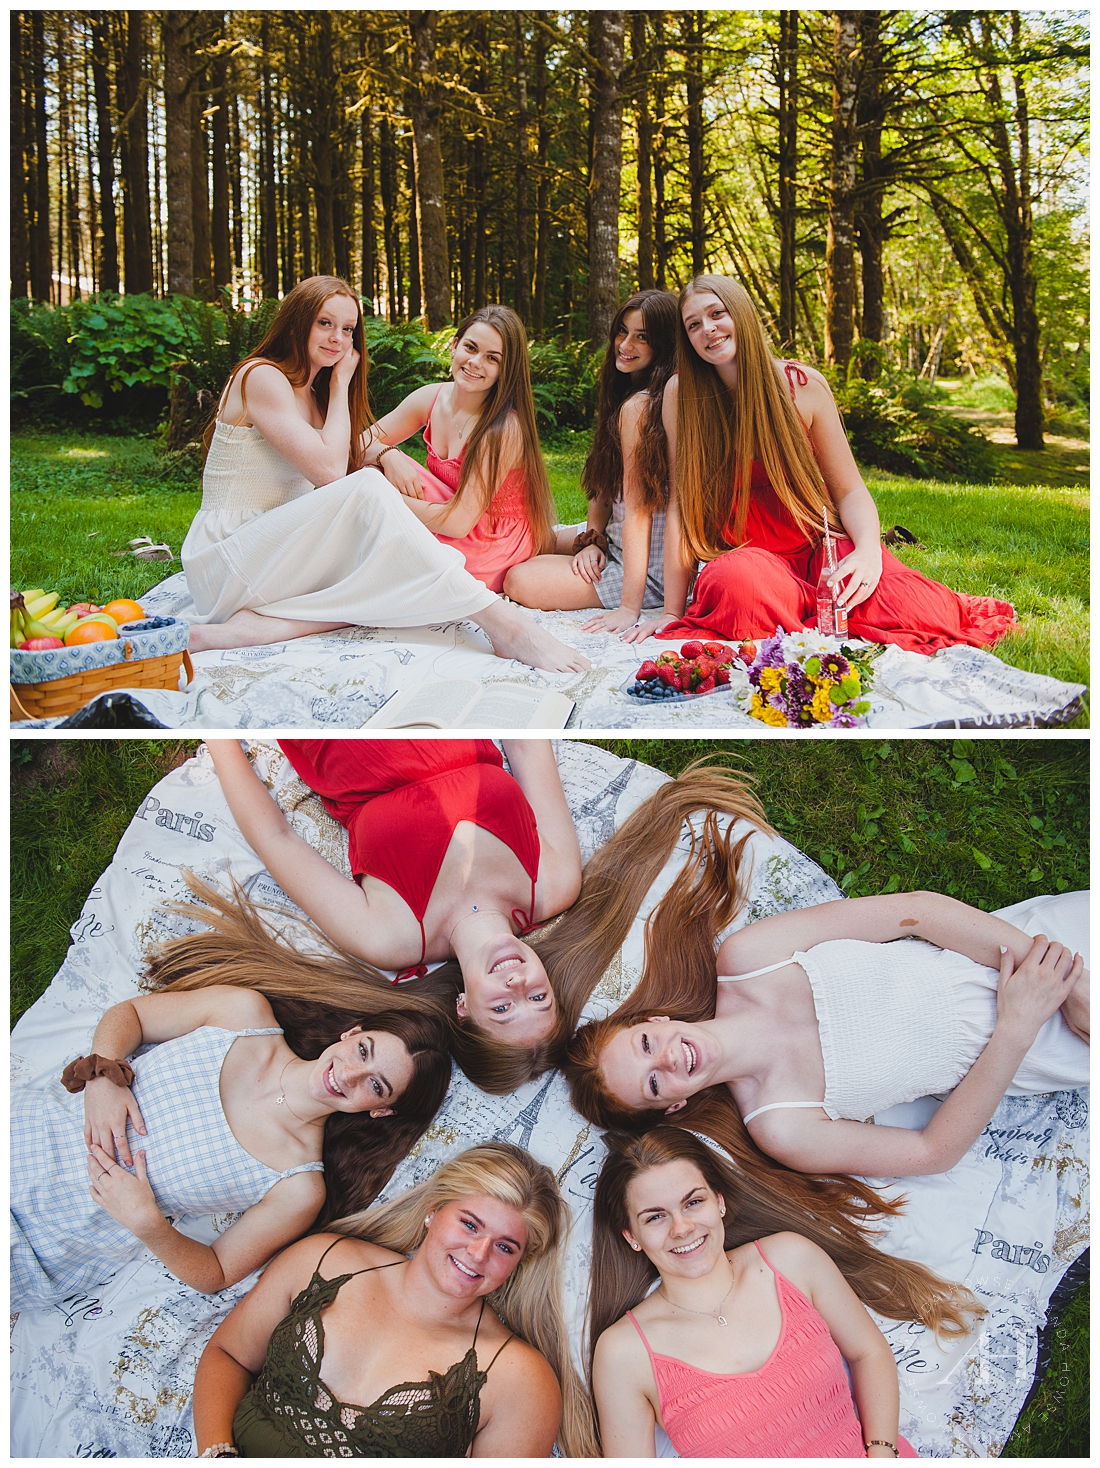 Senior Picnic for the AHP Model Team End of Summer Photoshoot | Photographed by Amanda Howse 